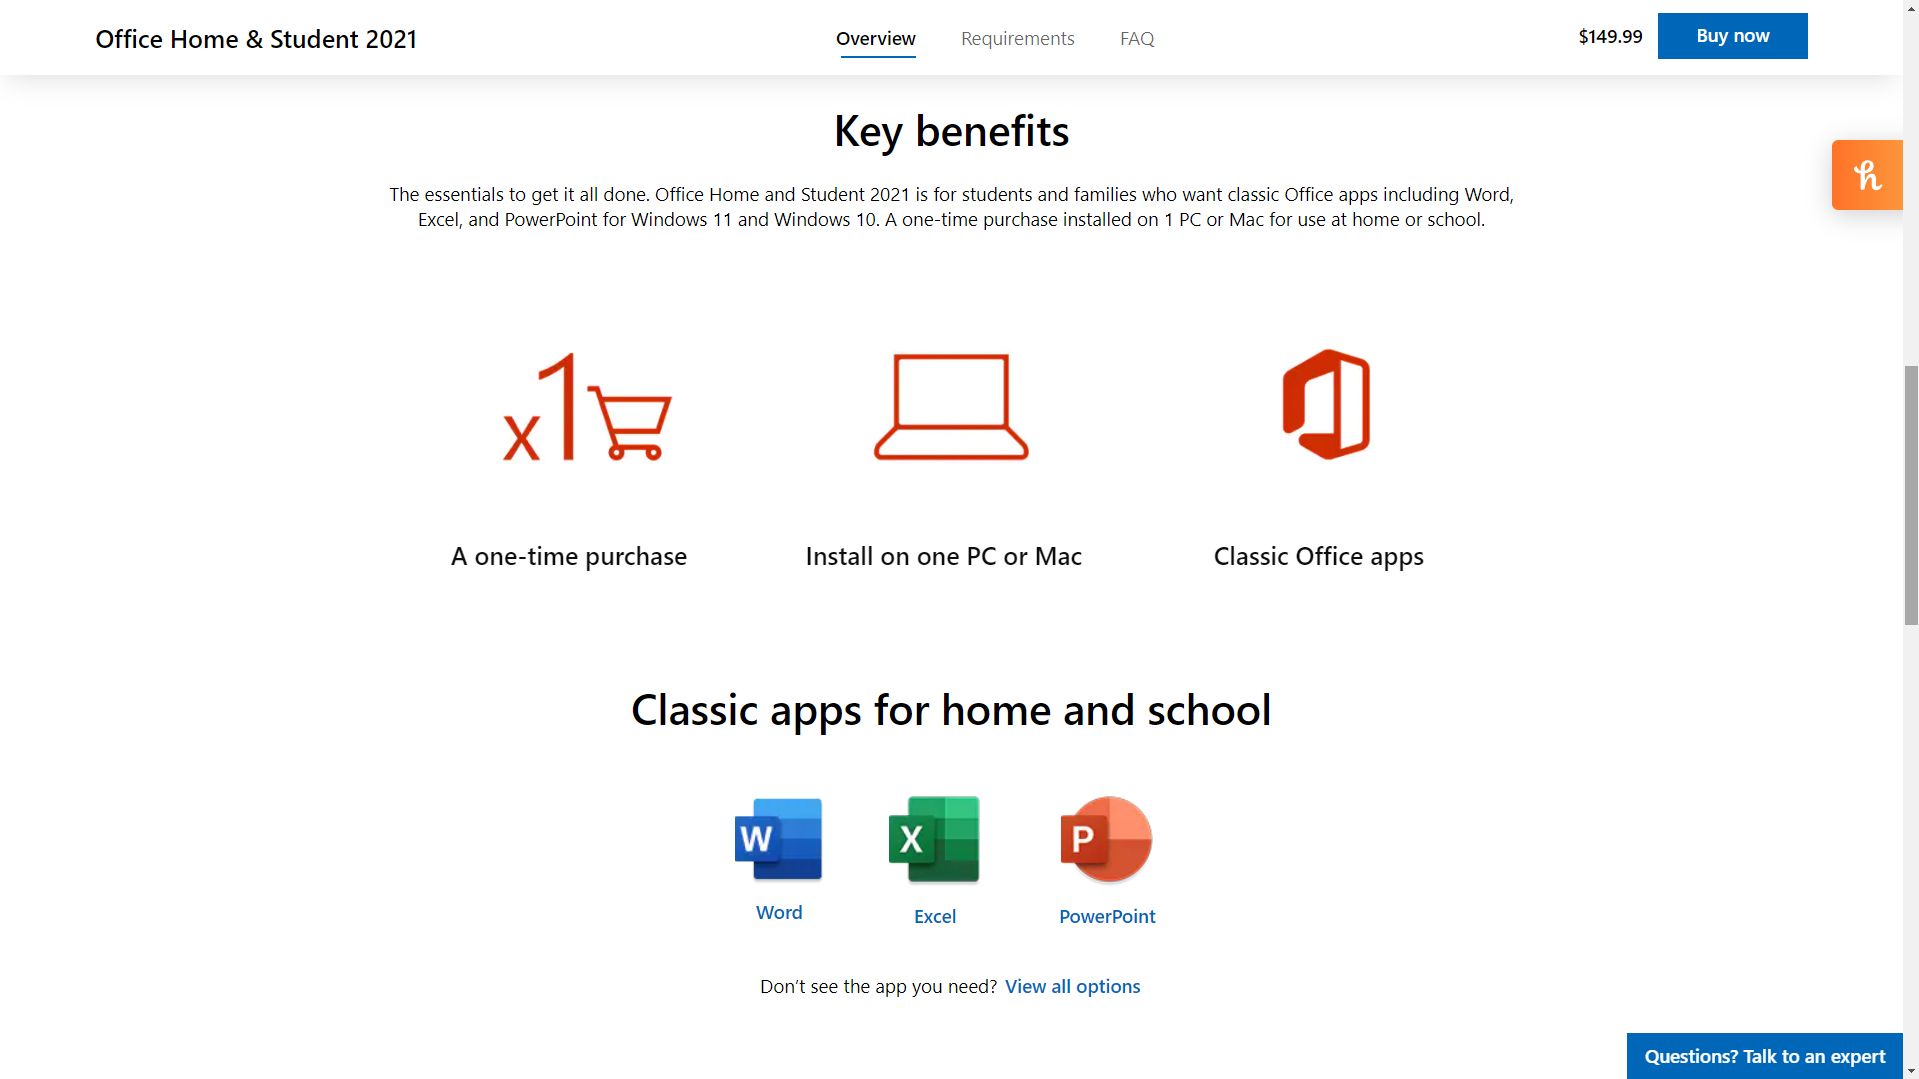 screenshot of Office Home & Student 2021 benefits on the Microsoft website